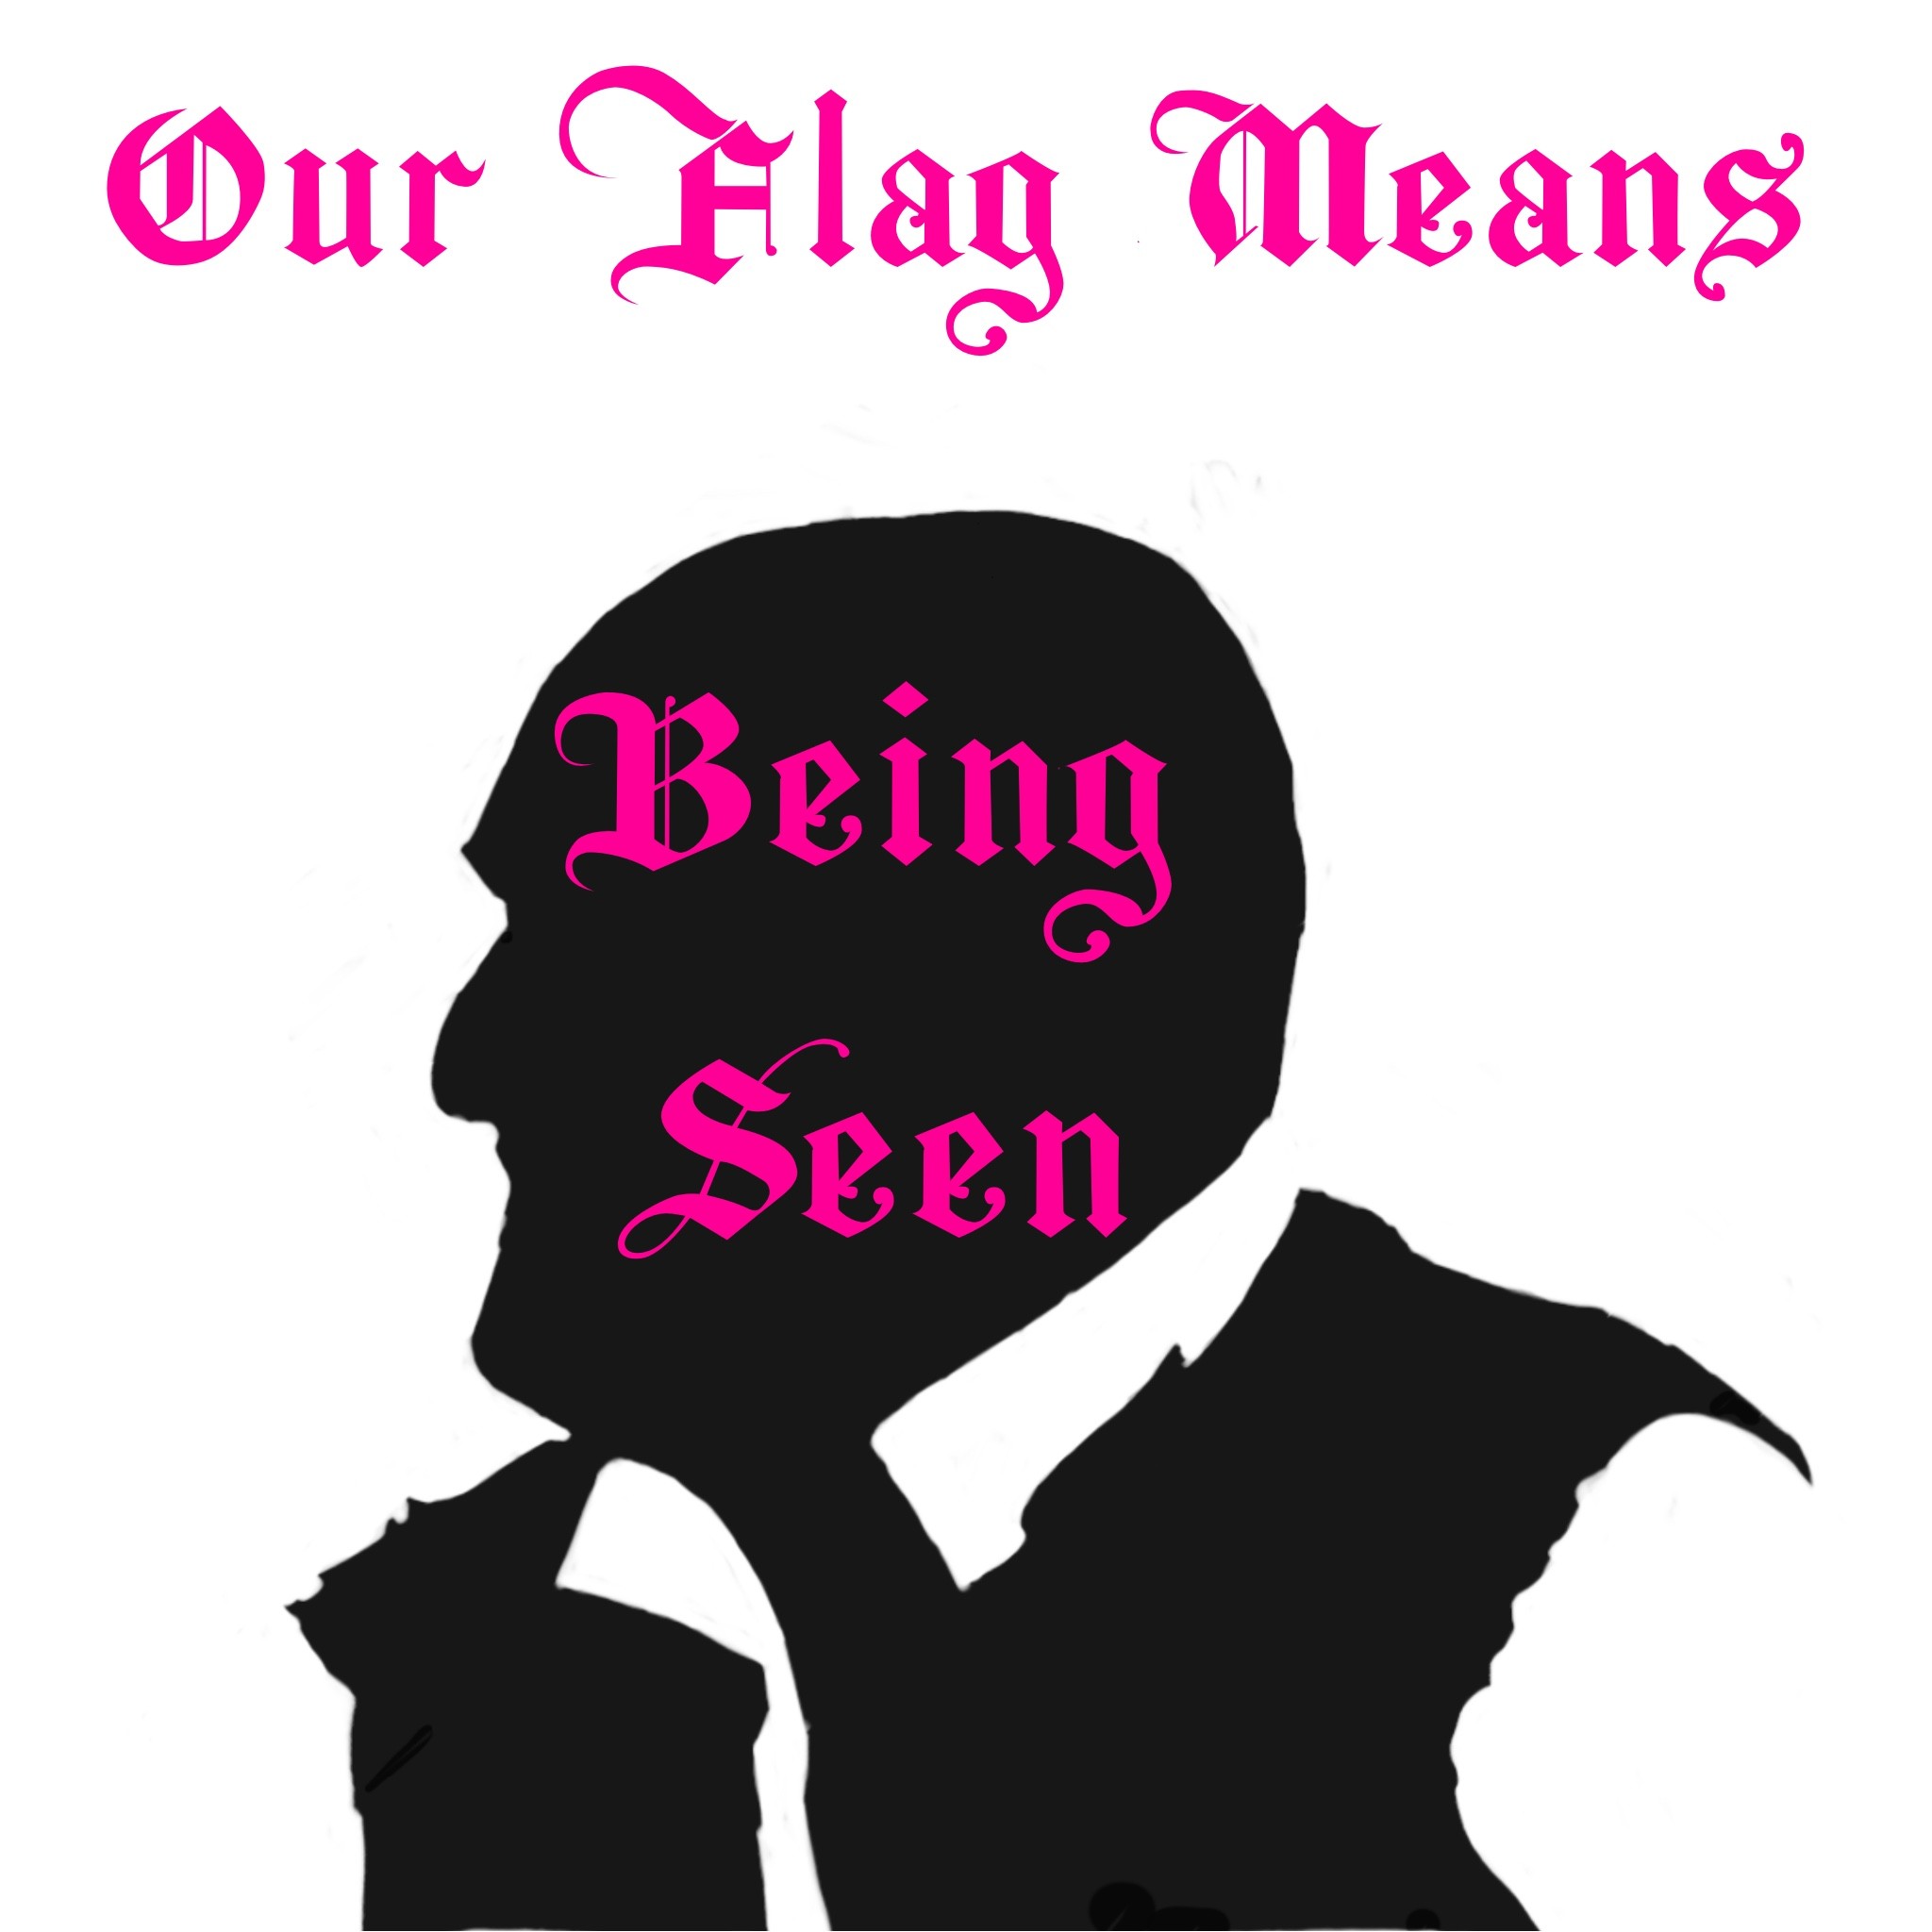 Being Seen- Our Flag Means Death Episode 2 "A Damned Man"